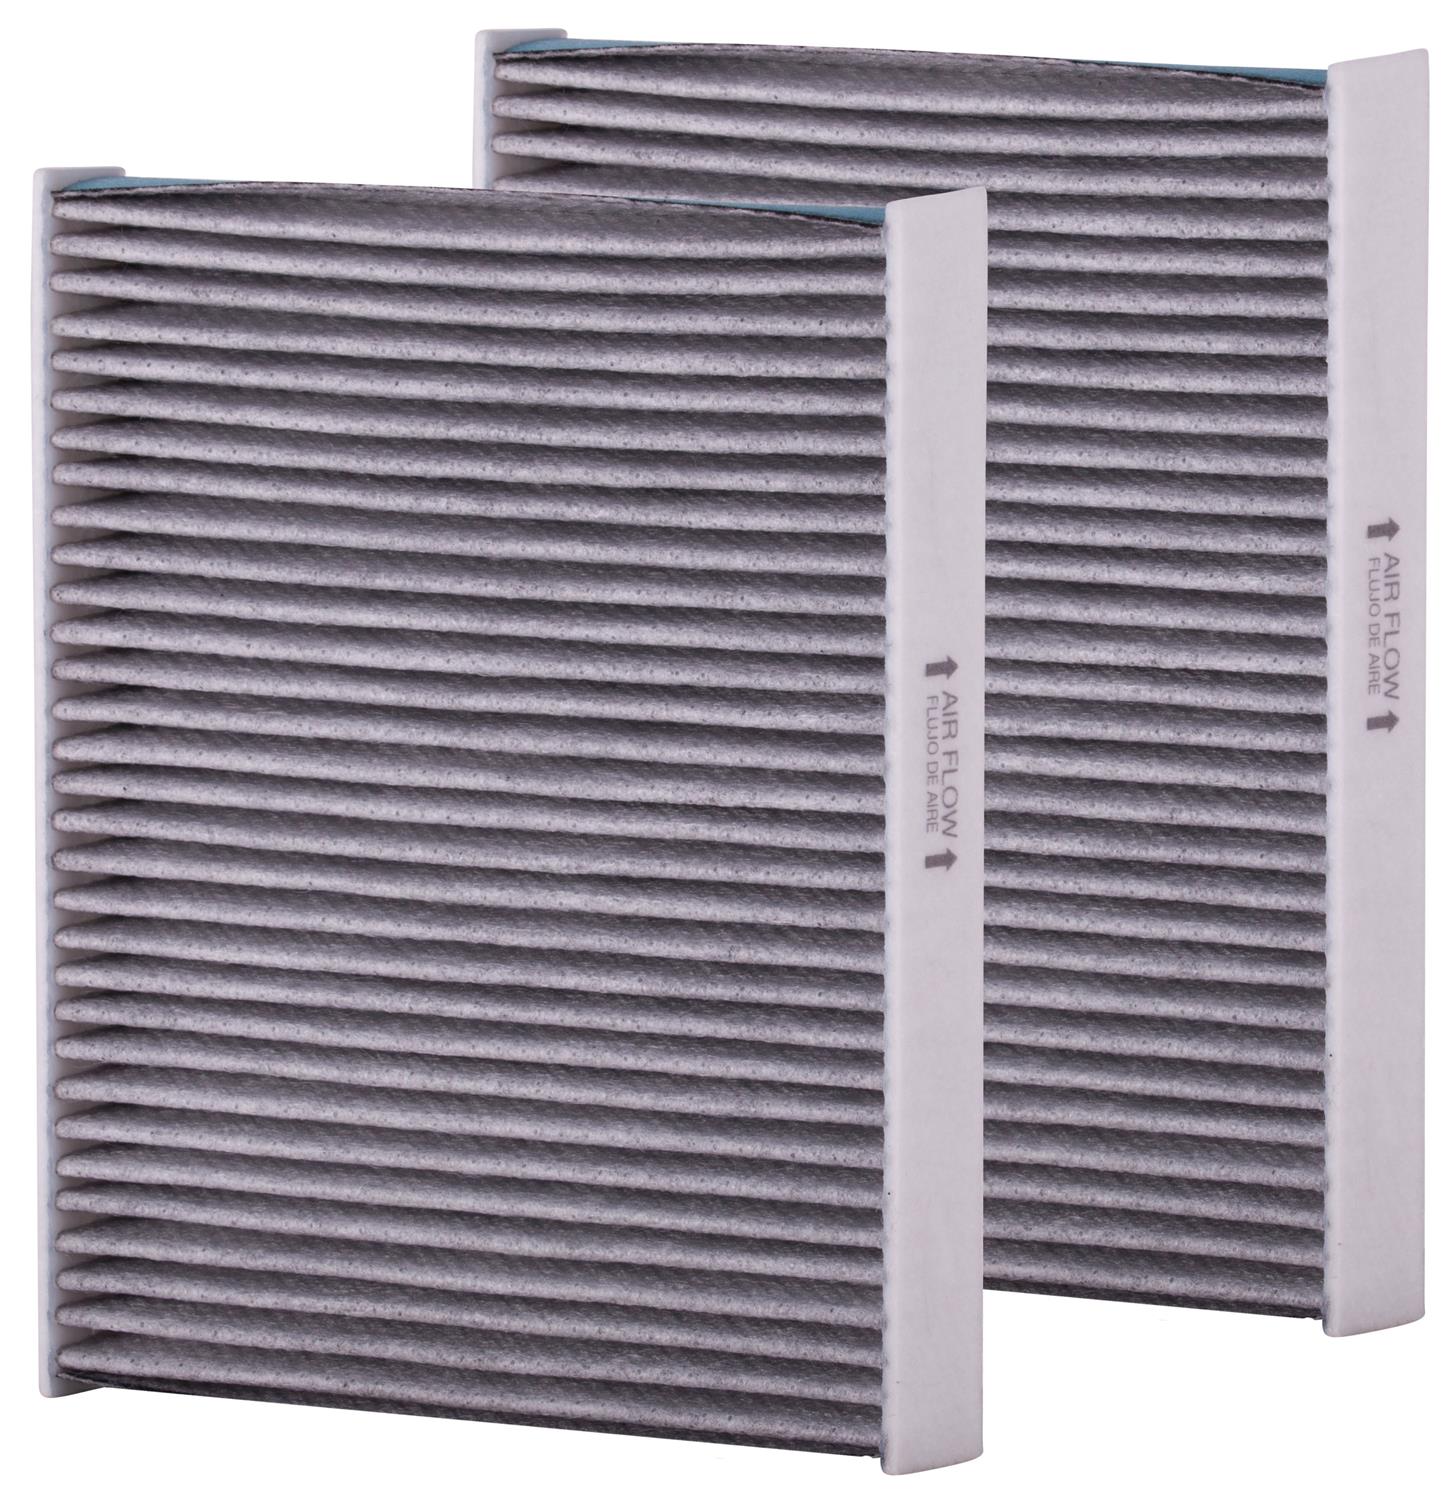 BMW 535i Cabin Air Filter 2010 PC4329X